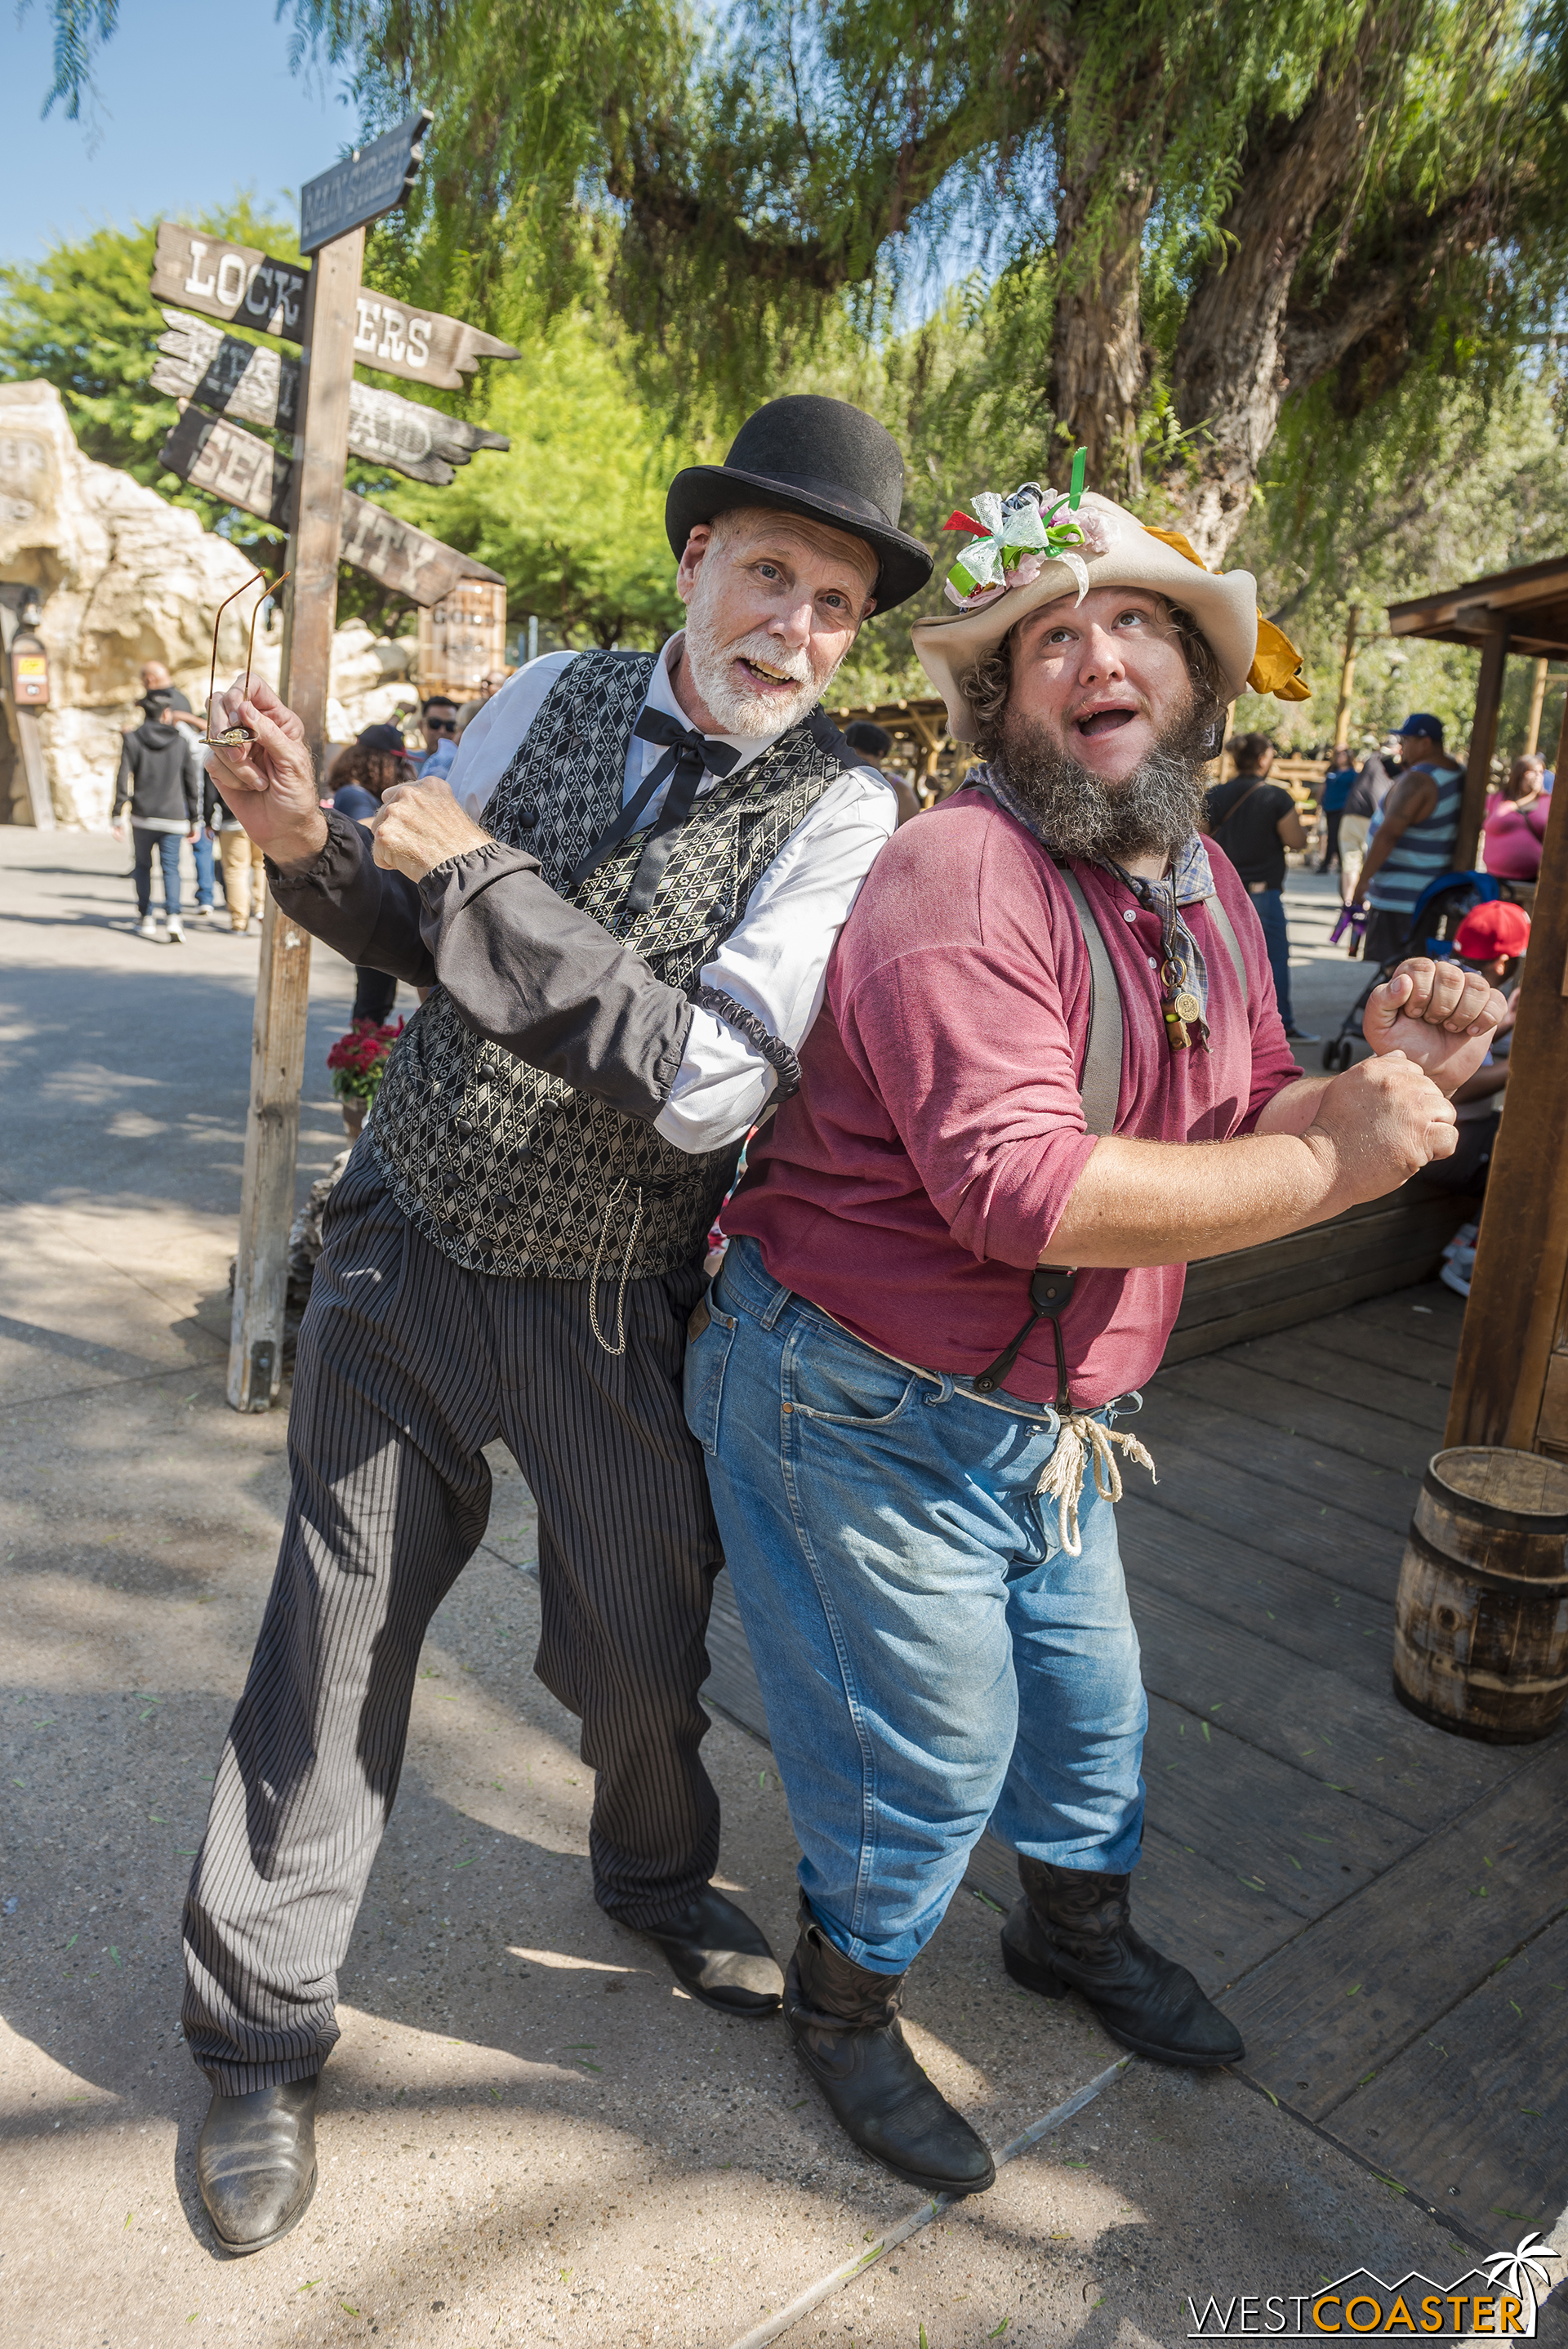  Zeke Connelly (left) and Prospector Flint Stahlek share a silly moment outside of the Assayer’s Office.  But Zeke worries about the delayed stagecoach, which is carrying his beloved wife to back to town. 